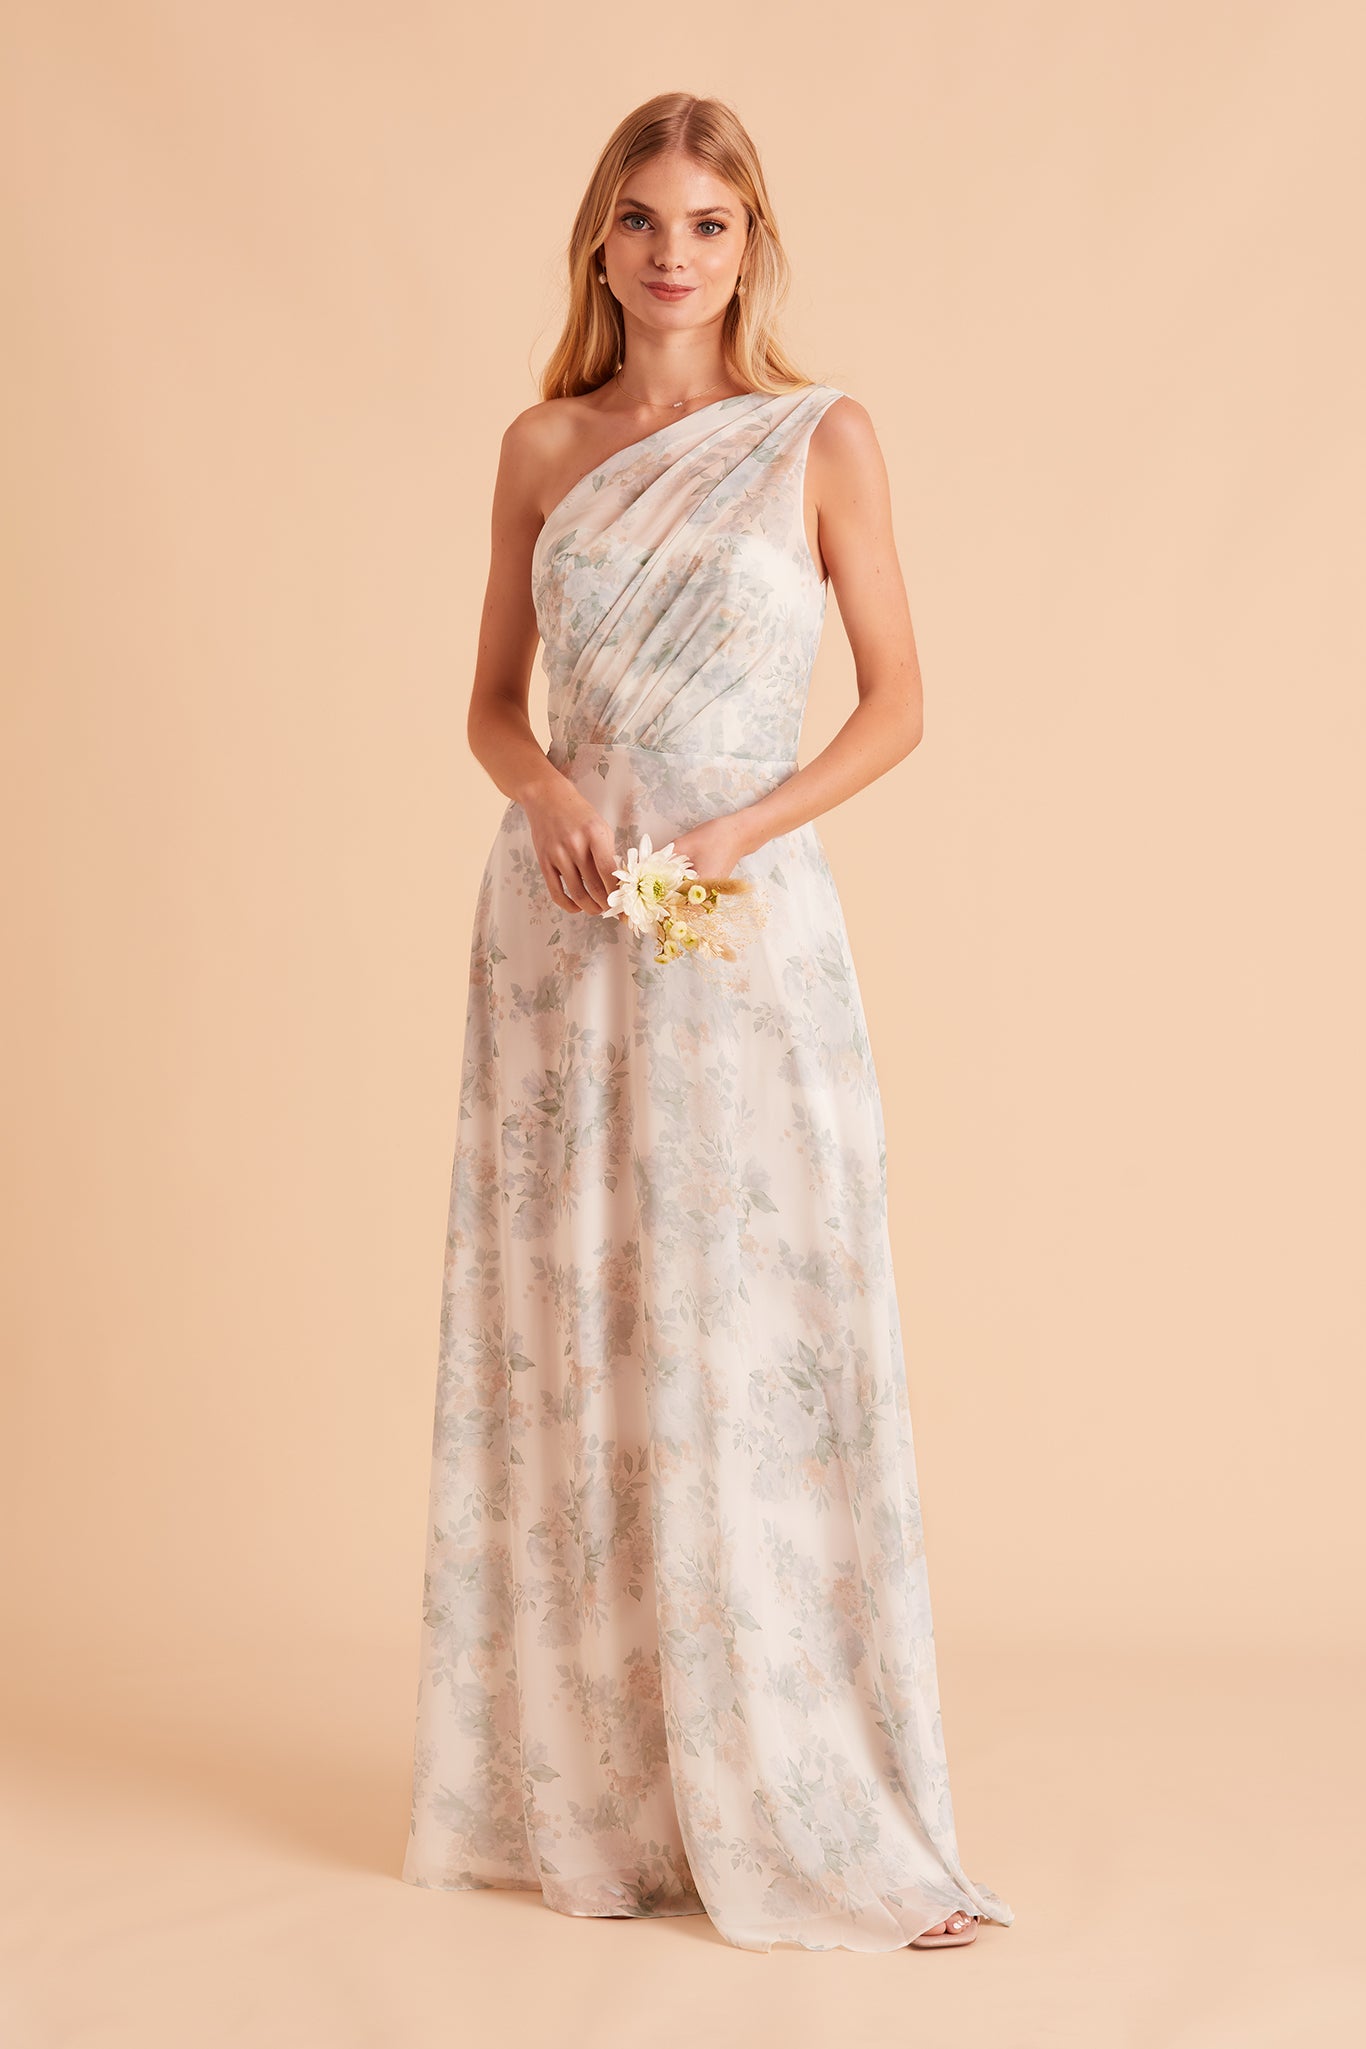 Kira bridesmaid dress in sage bouquet floral print chiffon by Birdy Grey, front view